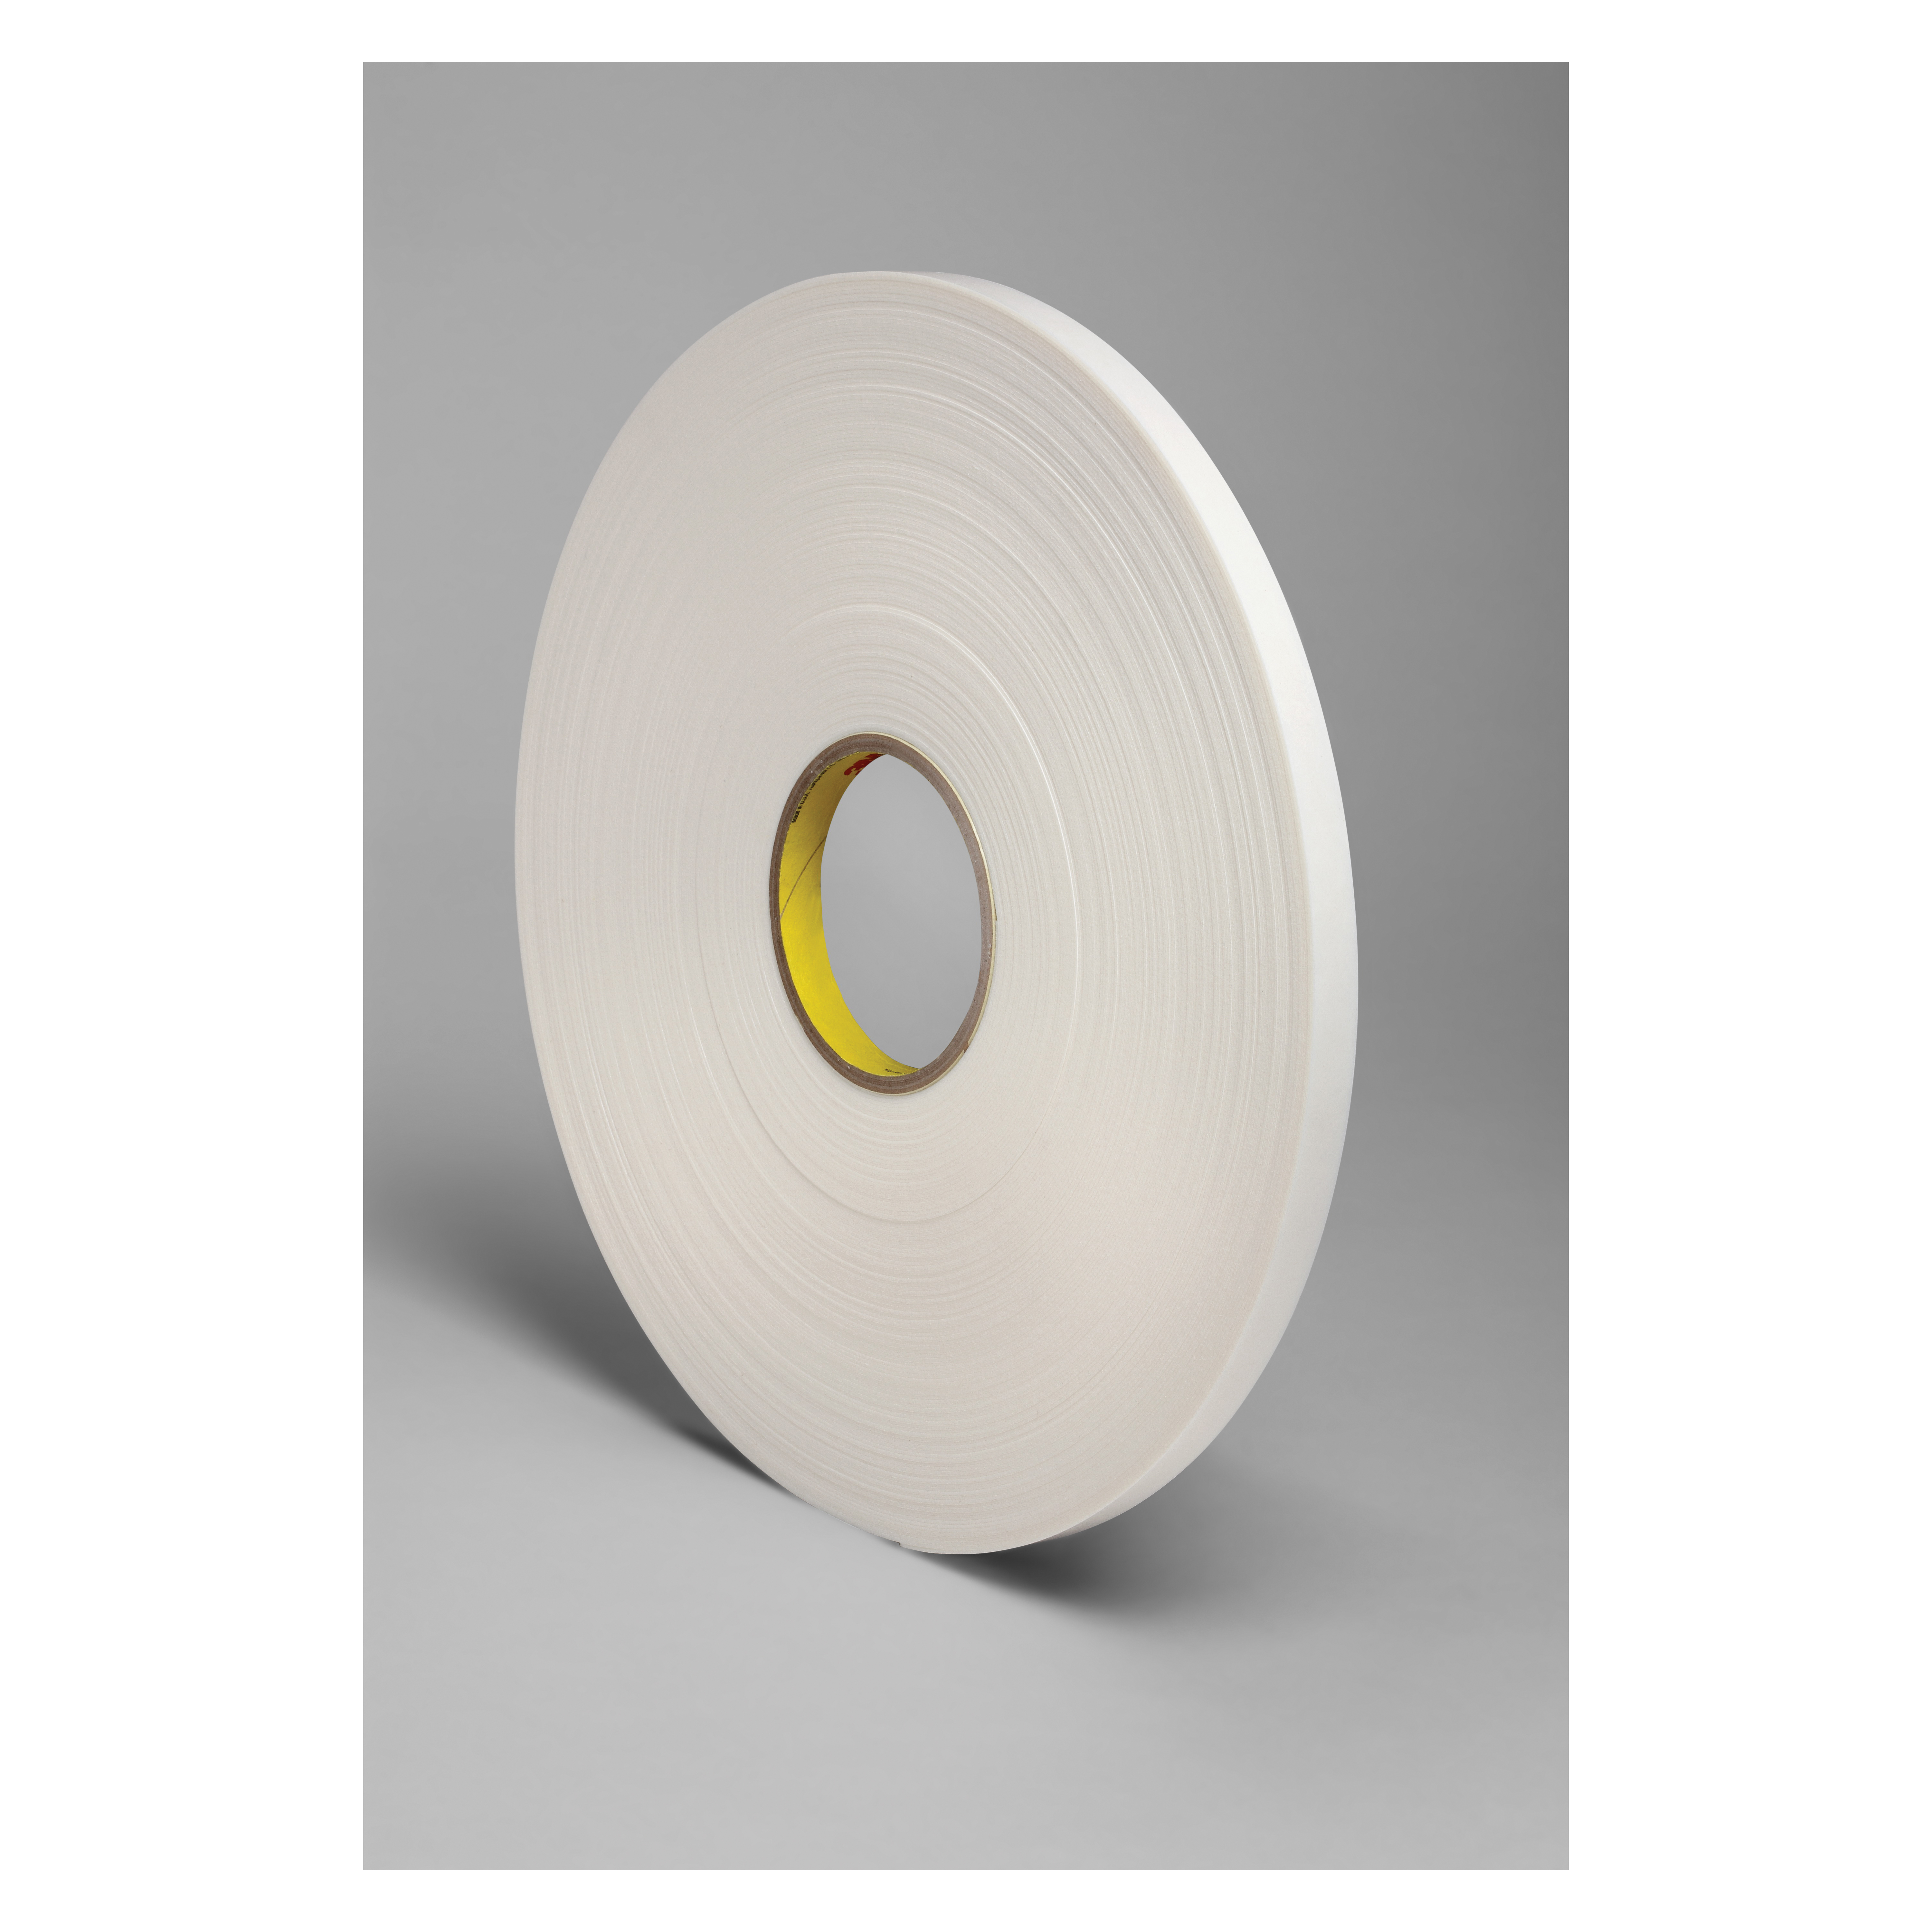 3M™ 021200-04873 Single Coated Foam Tape, 36 yd L x 2 in W, 125 mil THK, Acrylic Adhesive, Urethane Foam Backing, Natural